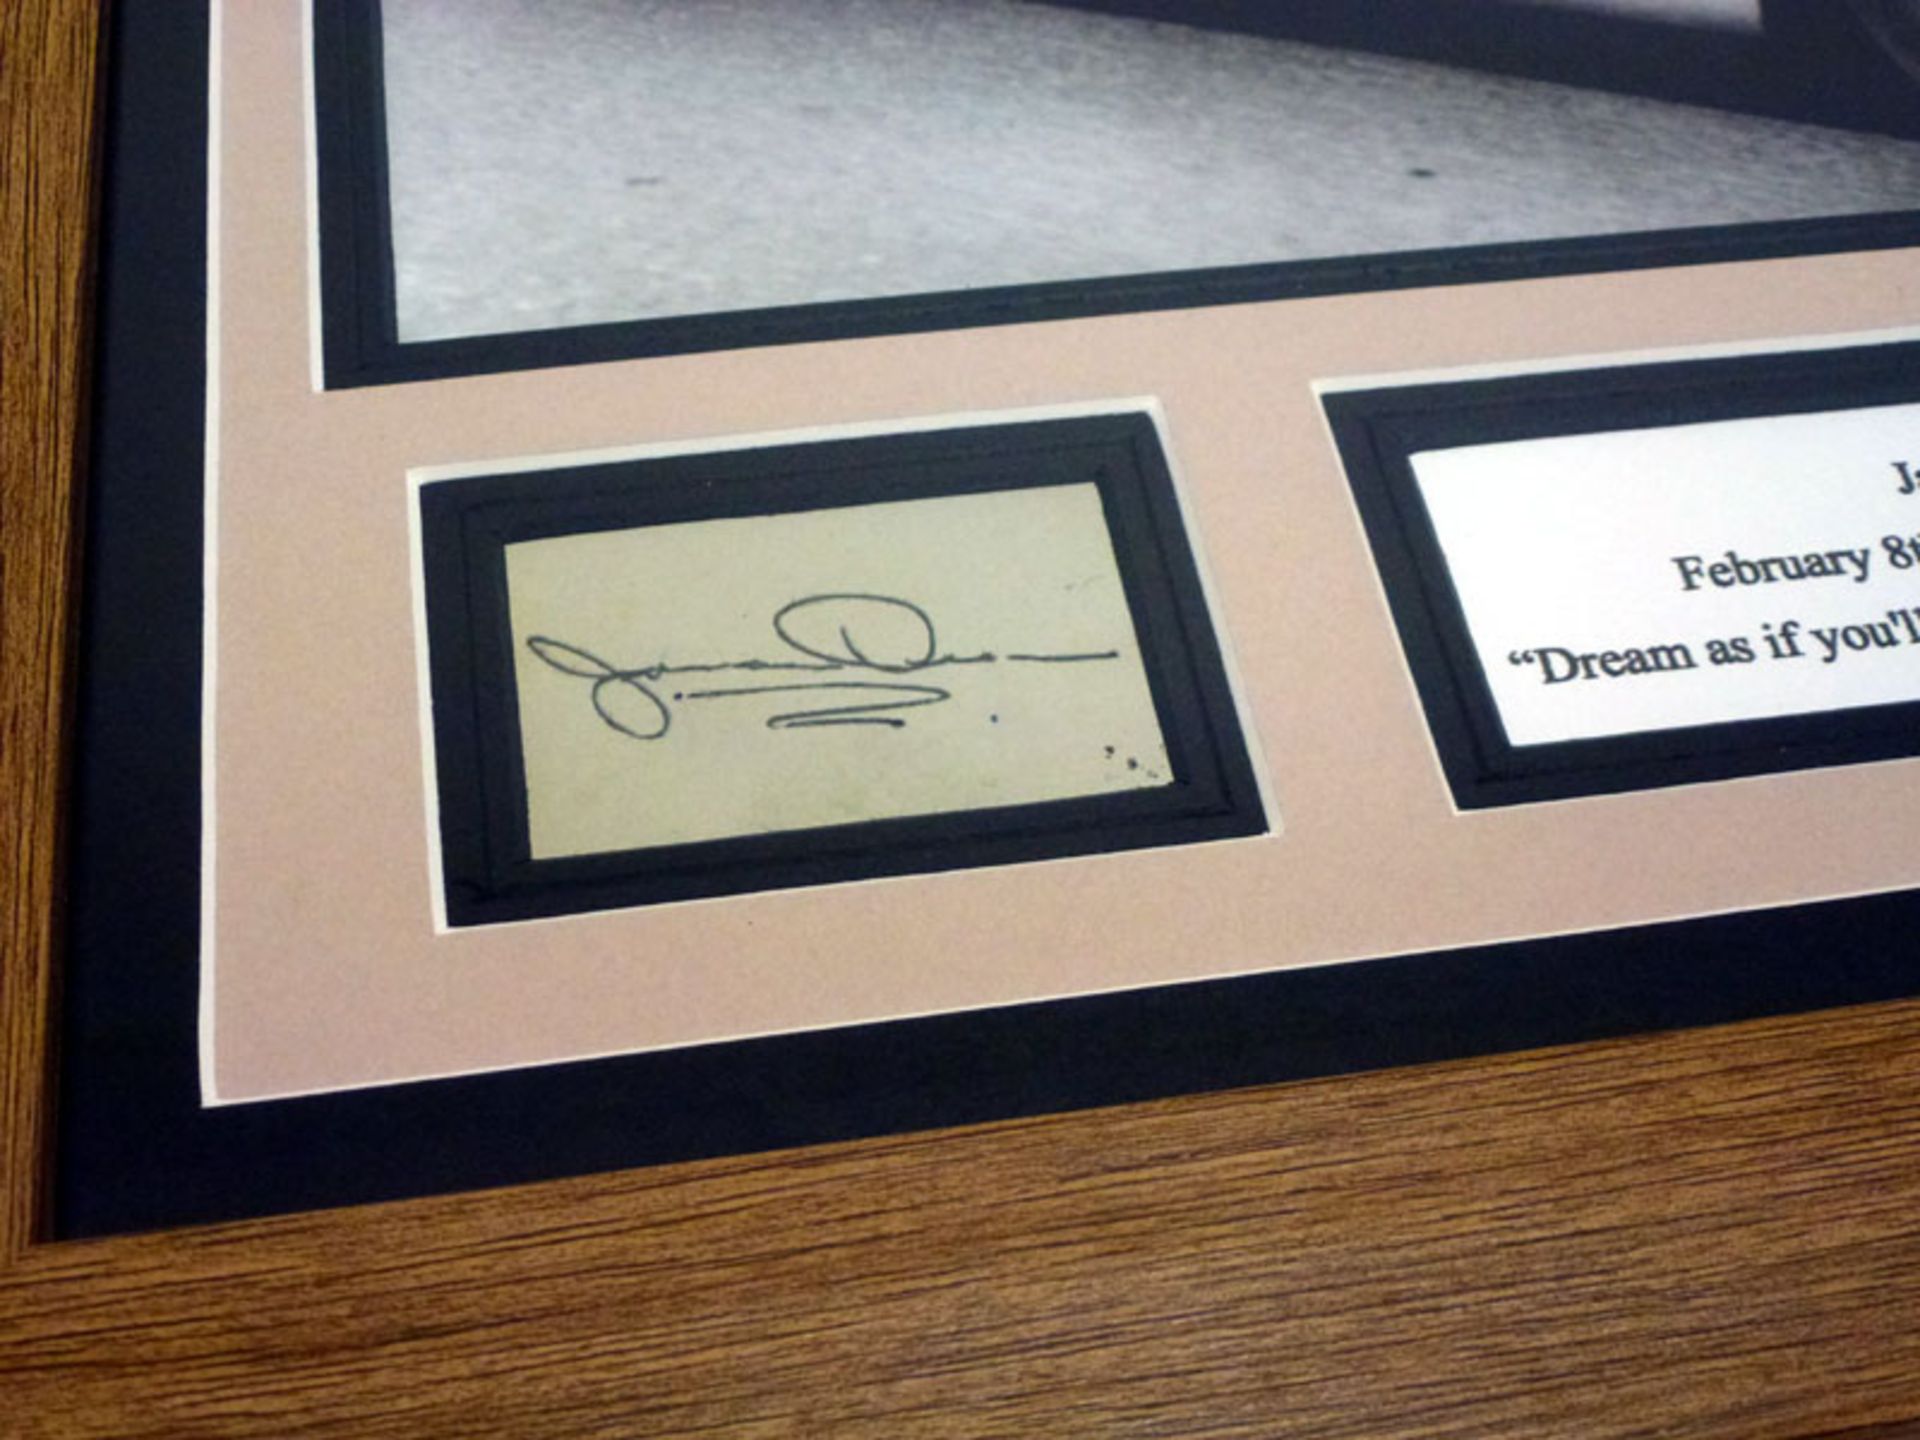 An Extremely Rare Hand-Signed James Dean Photographic Presentation - Image 2 of 3